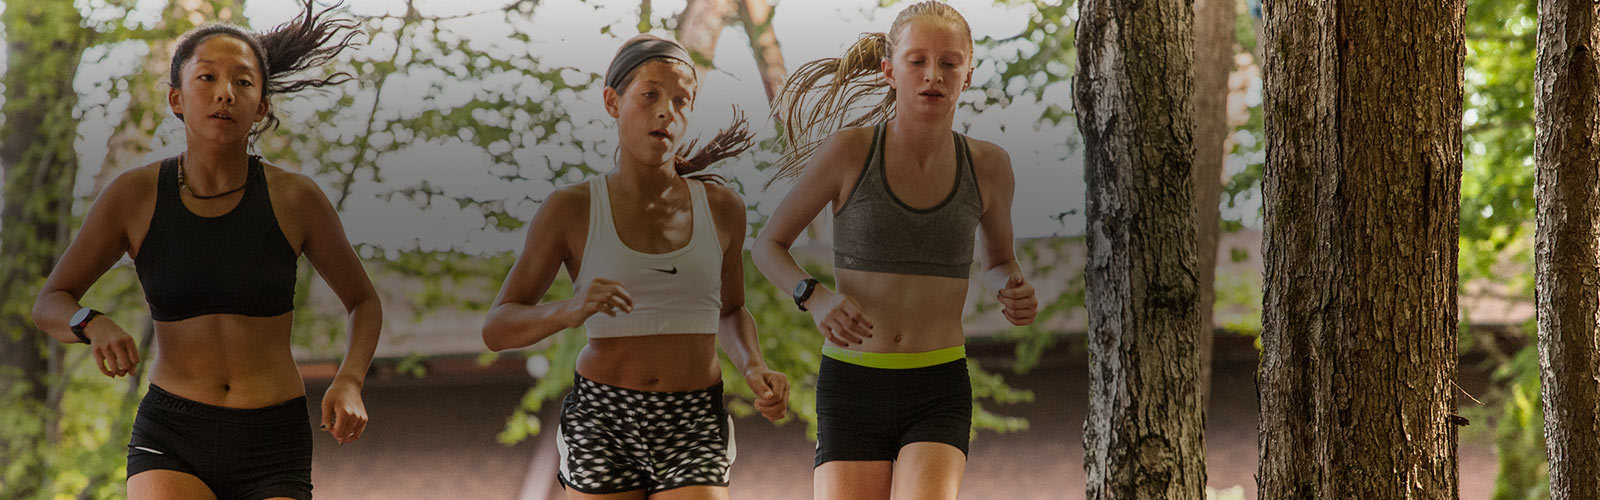 Nike Cross Country Running Camps Five Star Camp - XC Camp